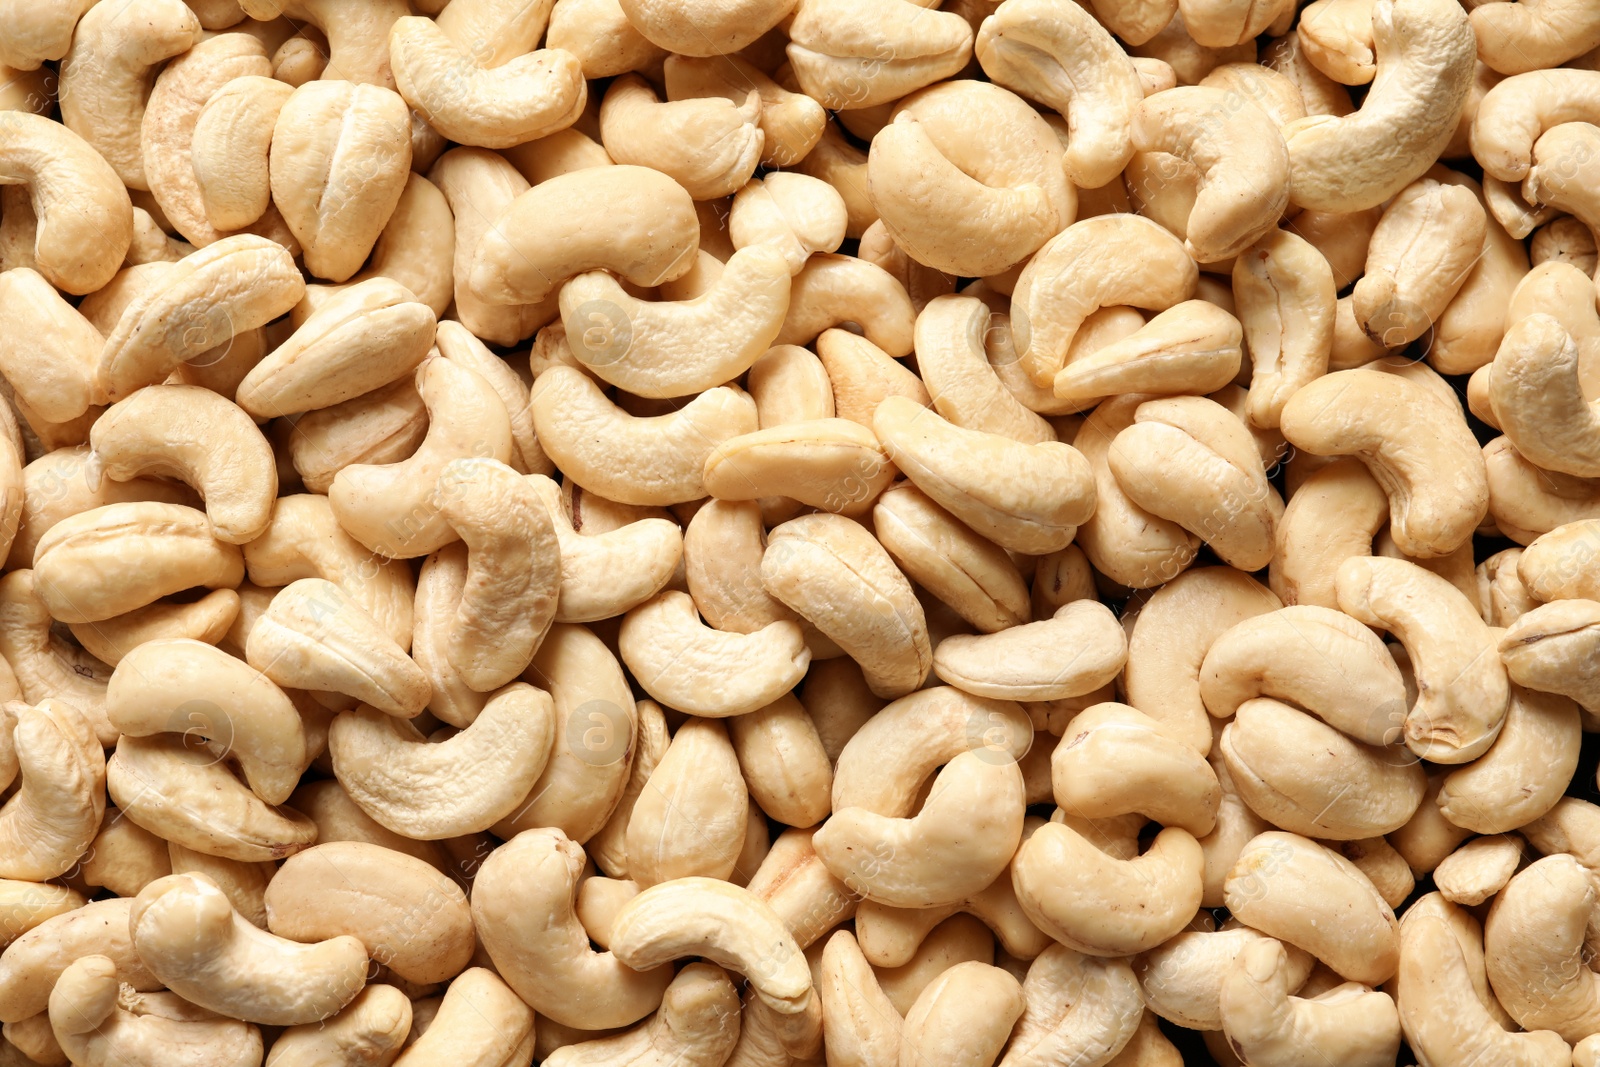 Photo of Tasty cashew nuts as background, top view